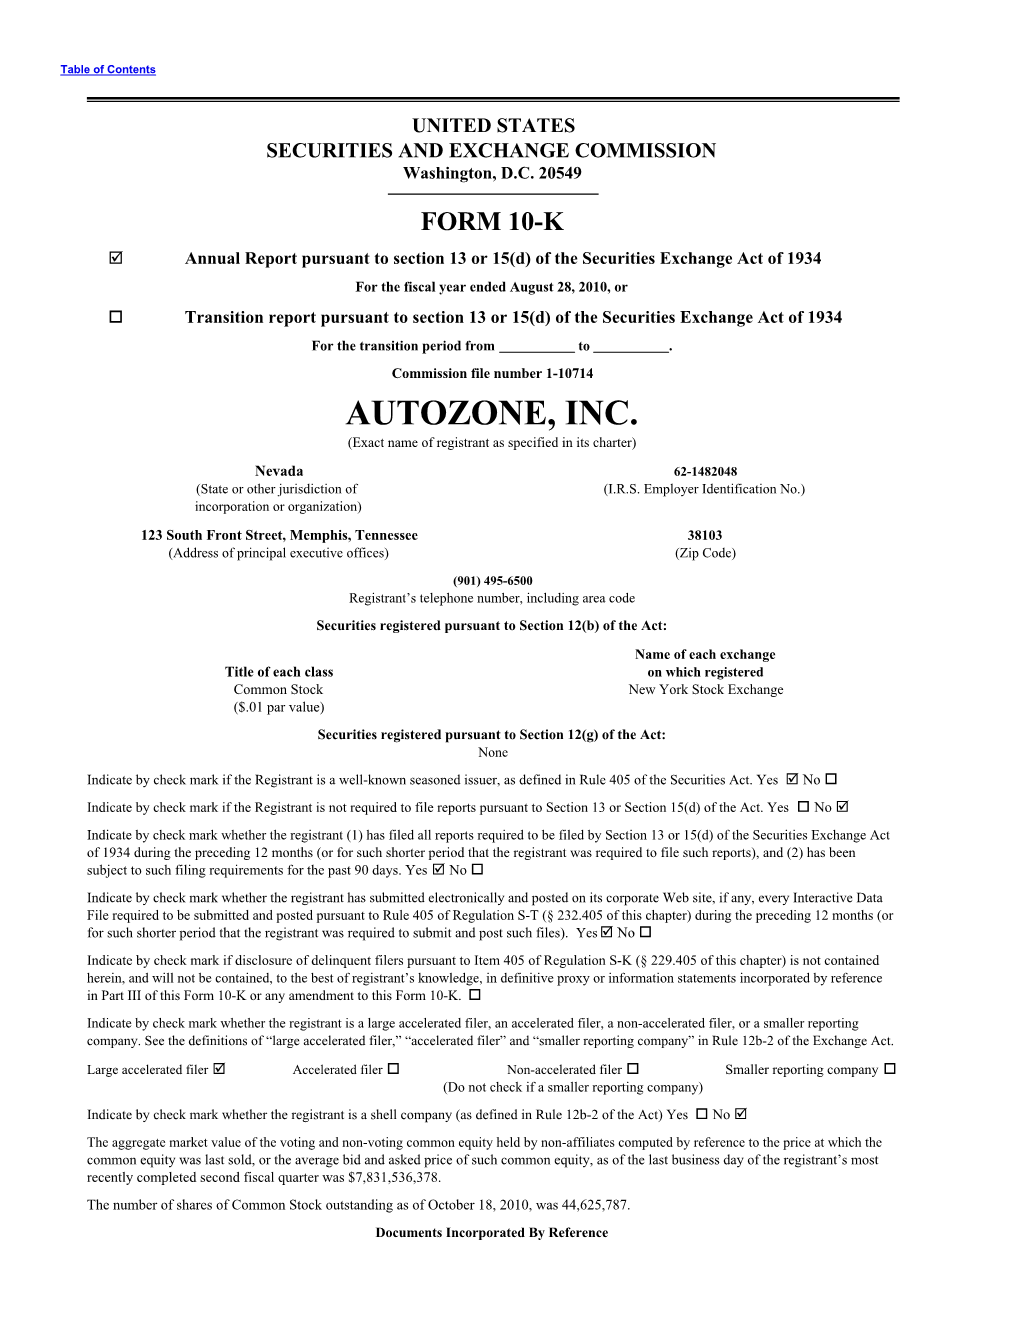 AUTOZONE, INC. (Exact Name of Registrant As Specified in Its Charter)